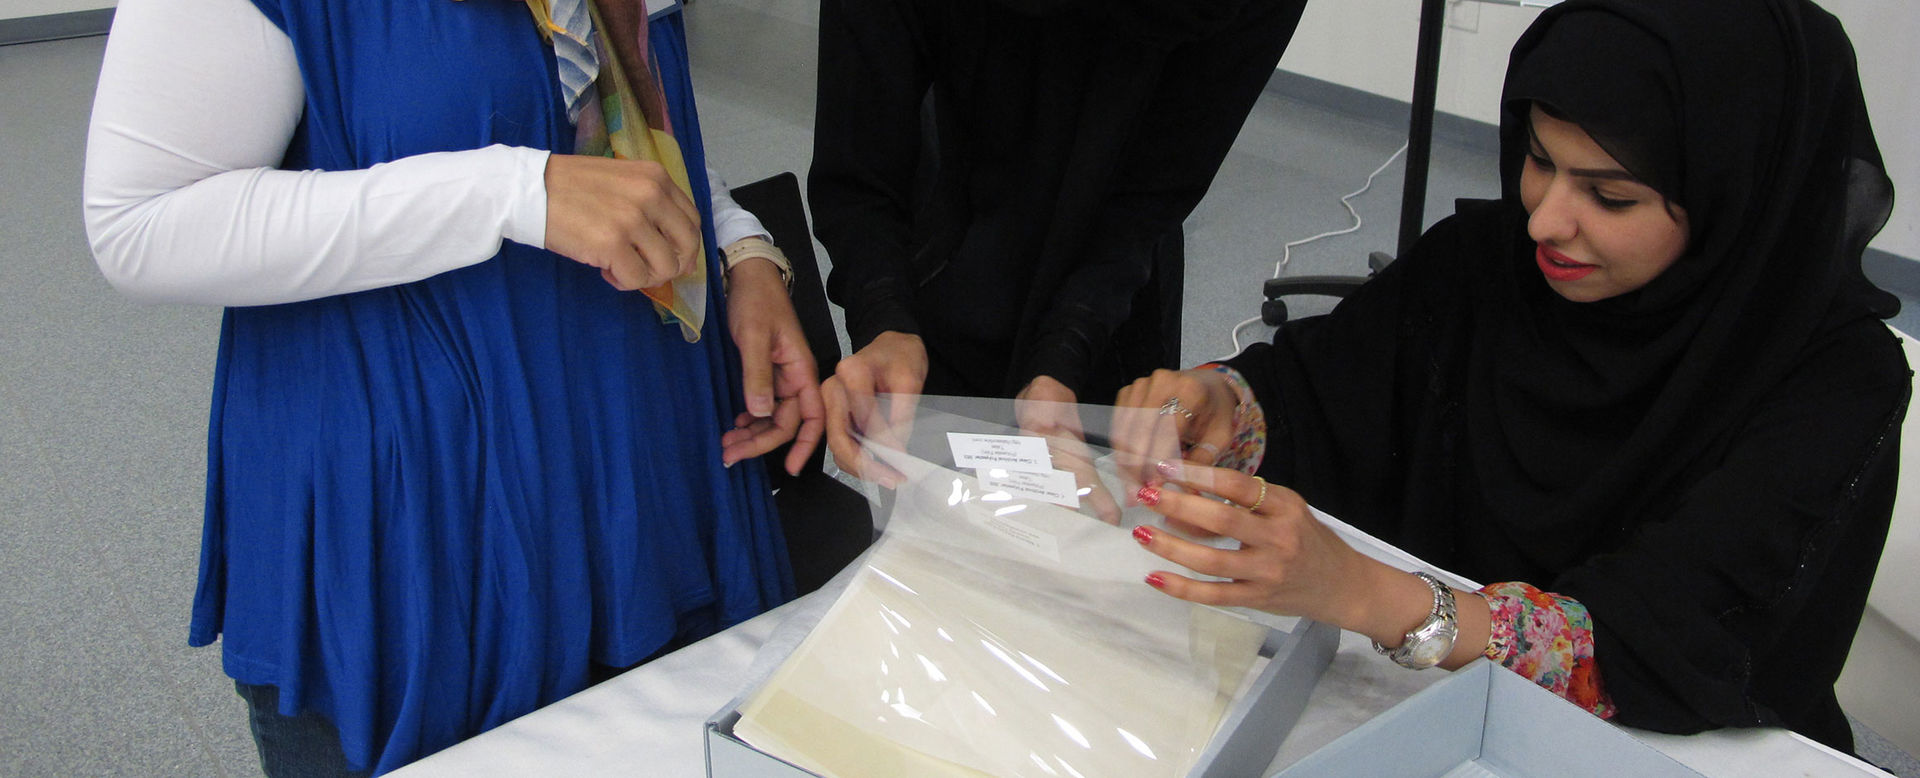 A group of women gather round a table to leaf through and consult papers protected in plastic sleeves stored in archival boxes